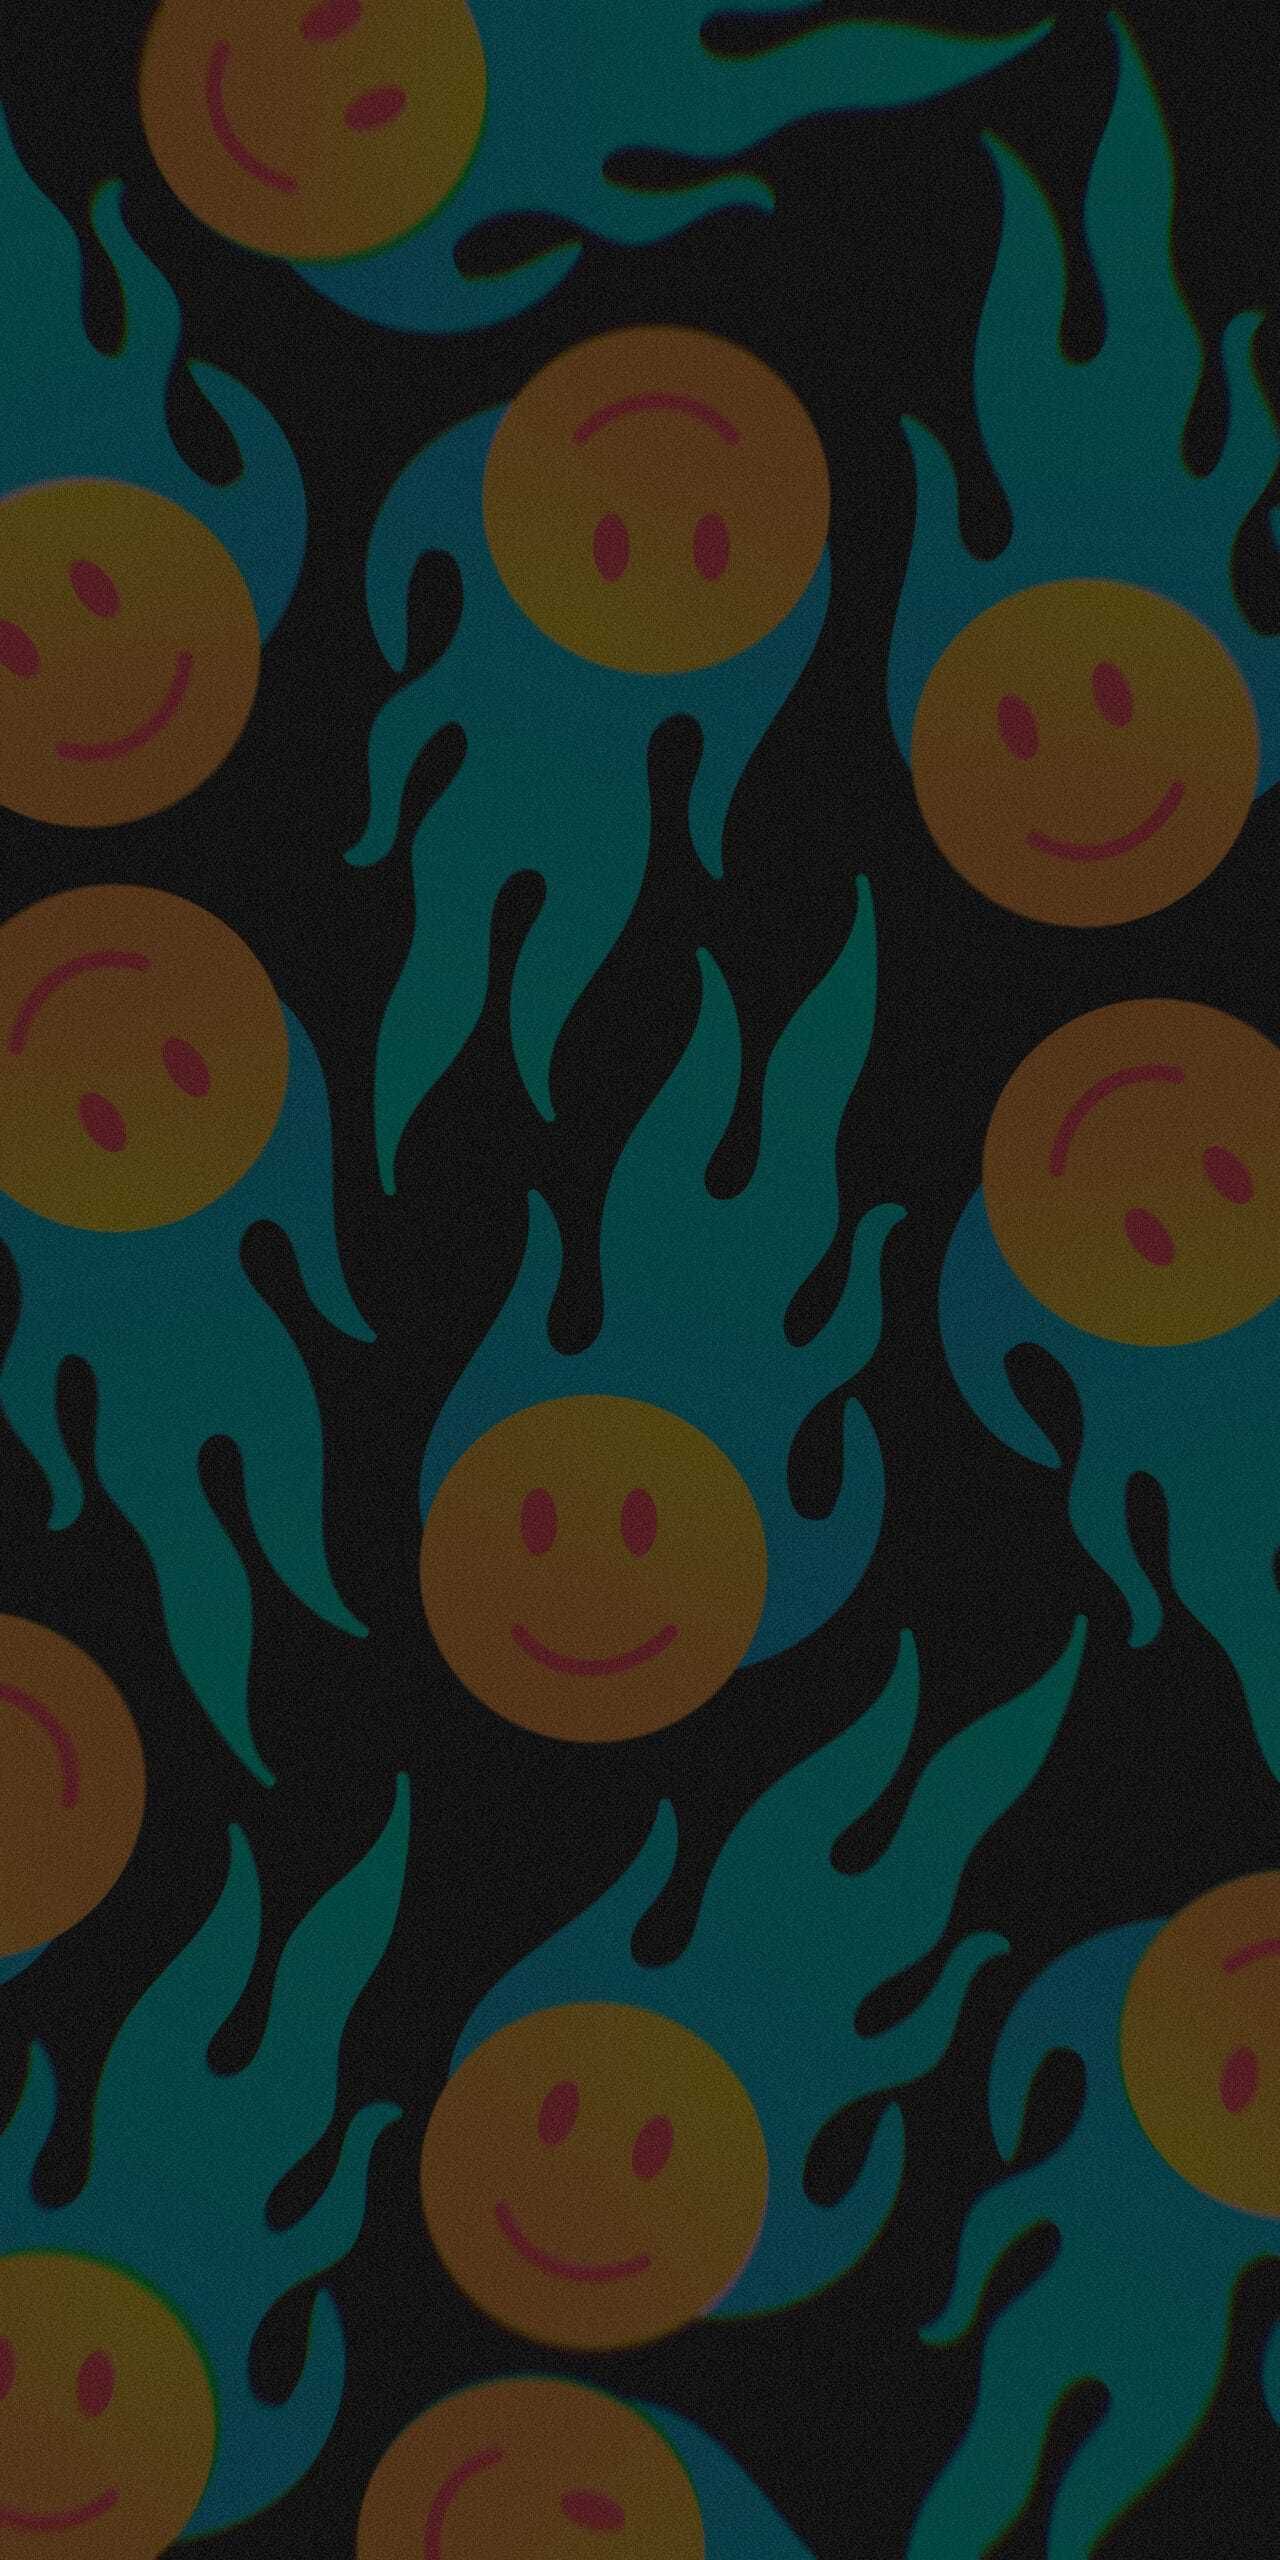 Blue Smiley Face Wallpaper Discover more Aesthetic, drippy smiley, Emoji, melting smiley, preppy wallpaper.. Preppy wallpaper, Smiley face, Emoji wallpaper